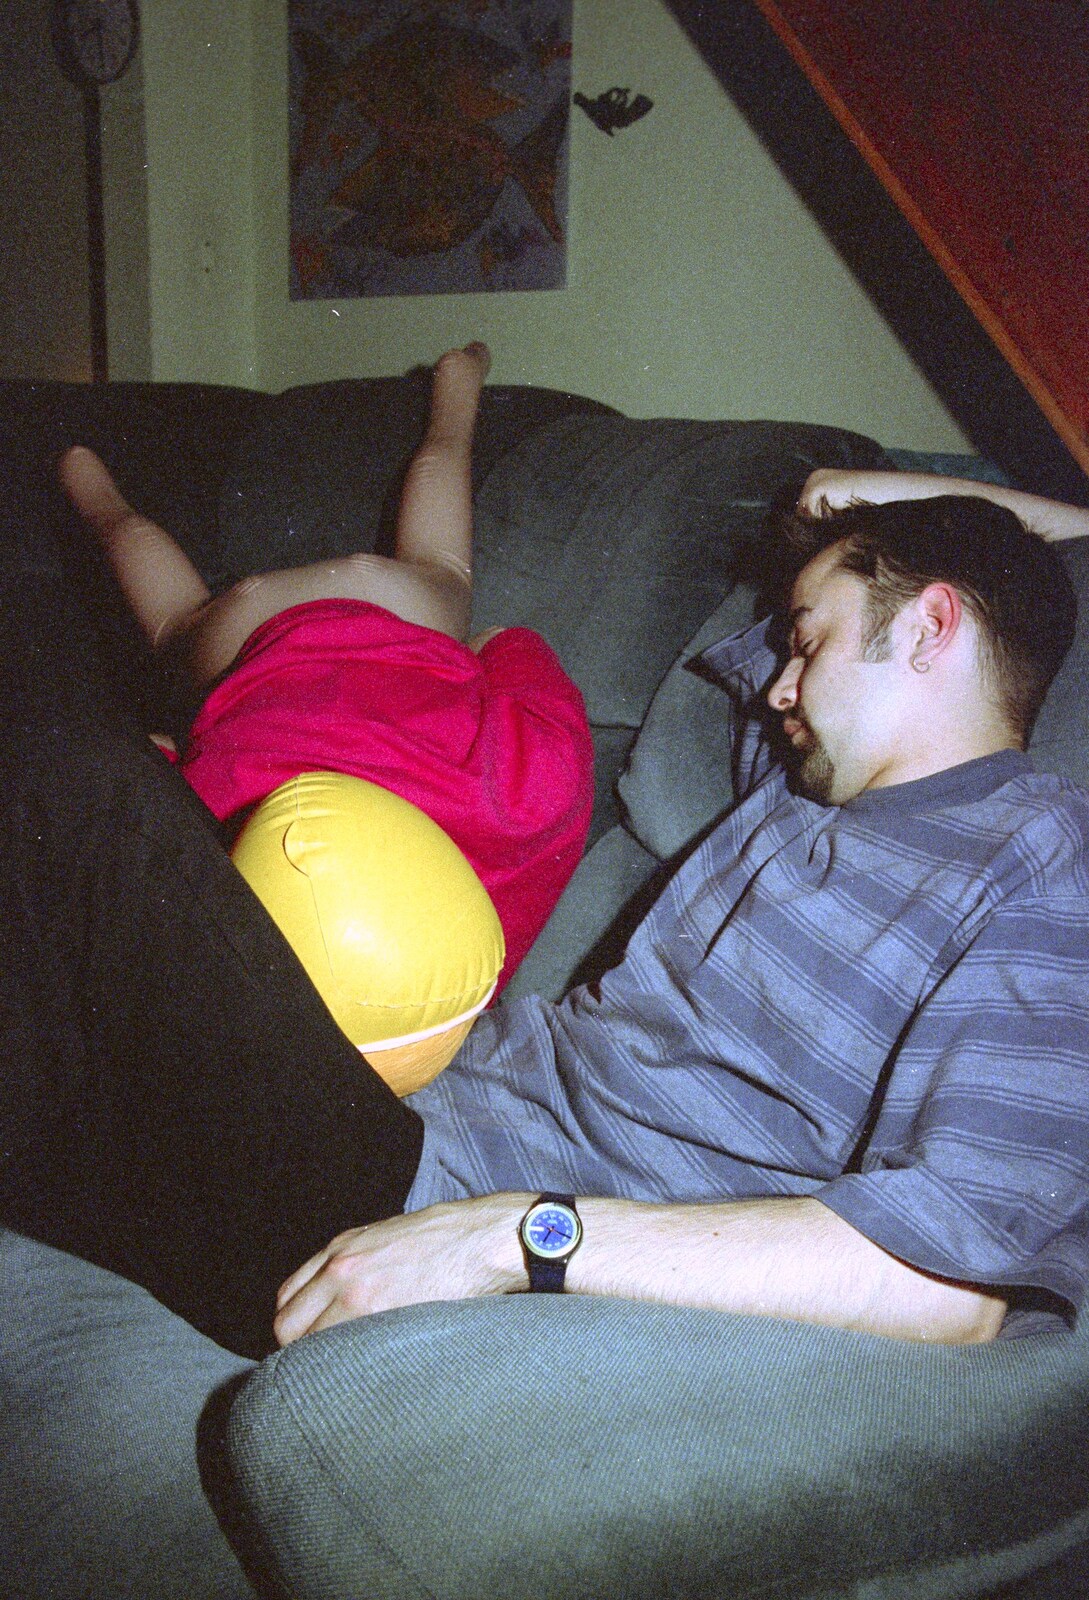 A CISU Party Round Trev's House, Cavendish Street, Ipswich - 17th May 1997: Trev and the inflatable woman